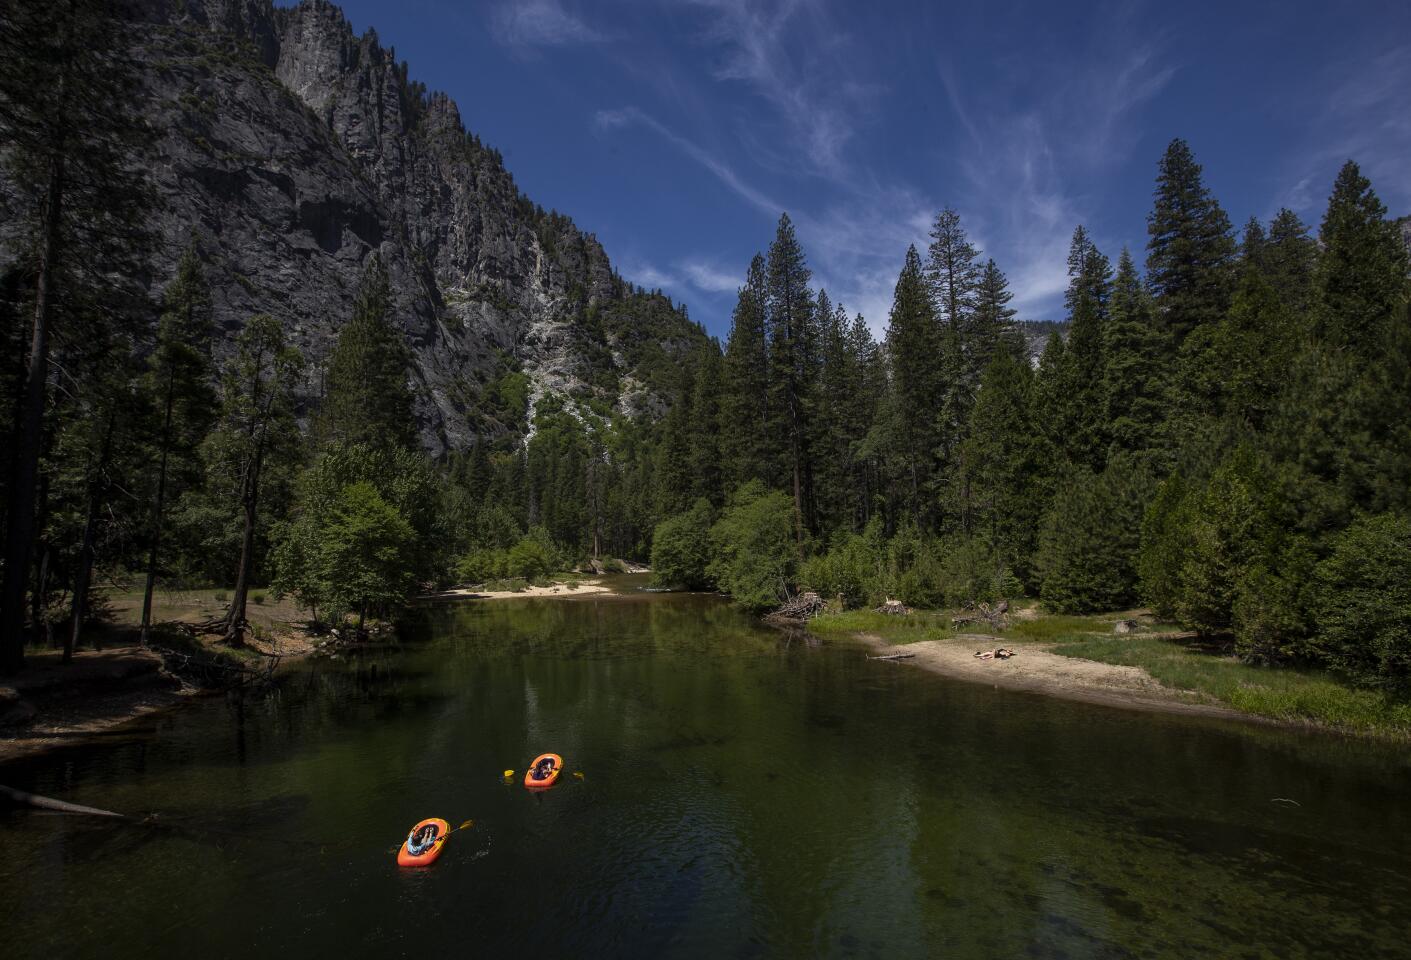 Rafters on the Merced River in Yosemite Valley.